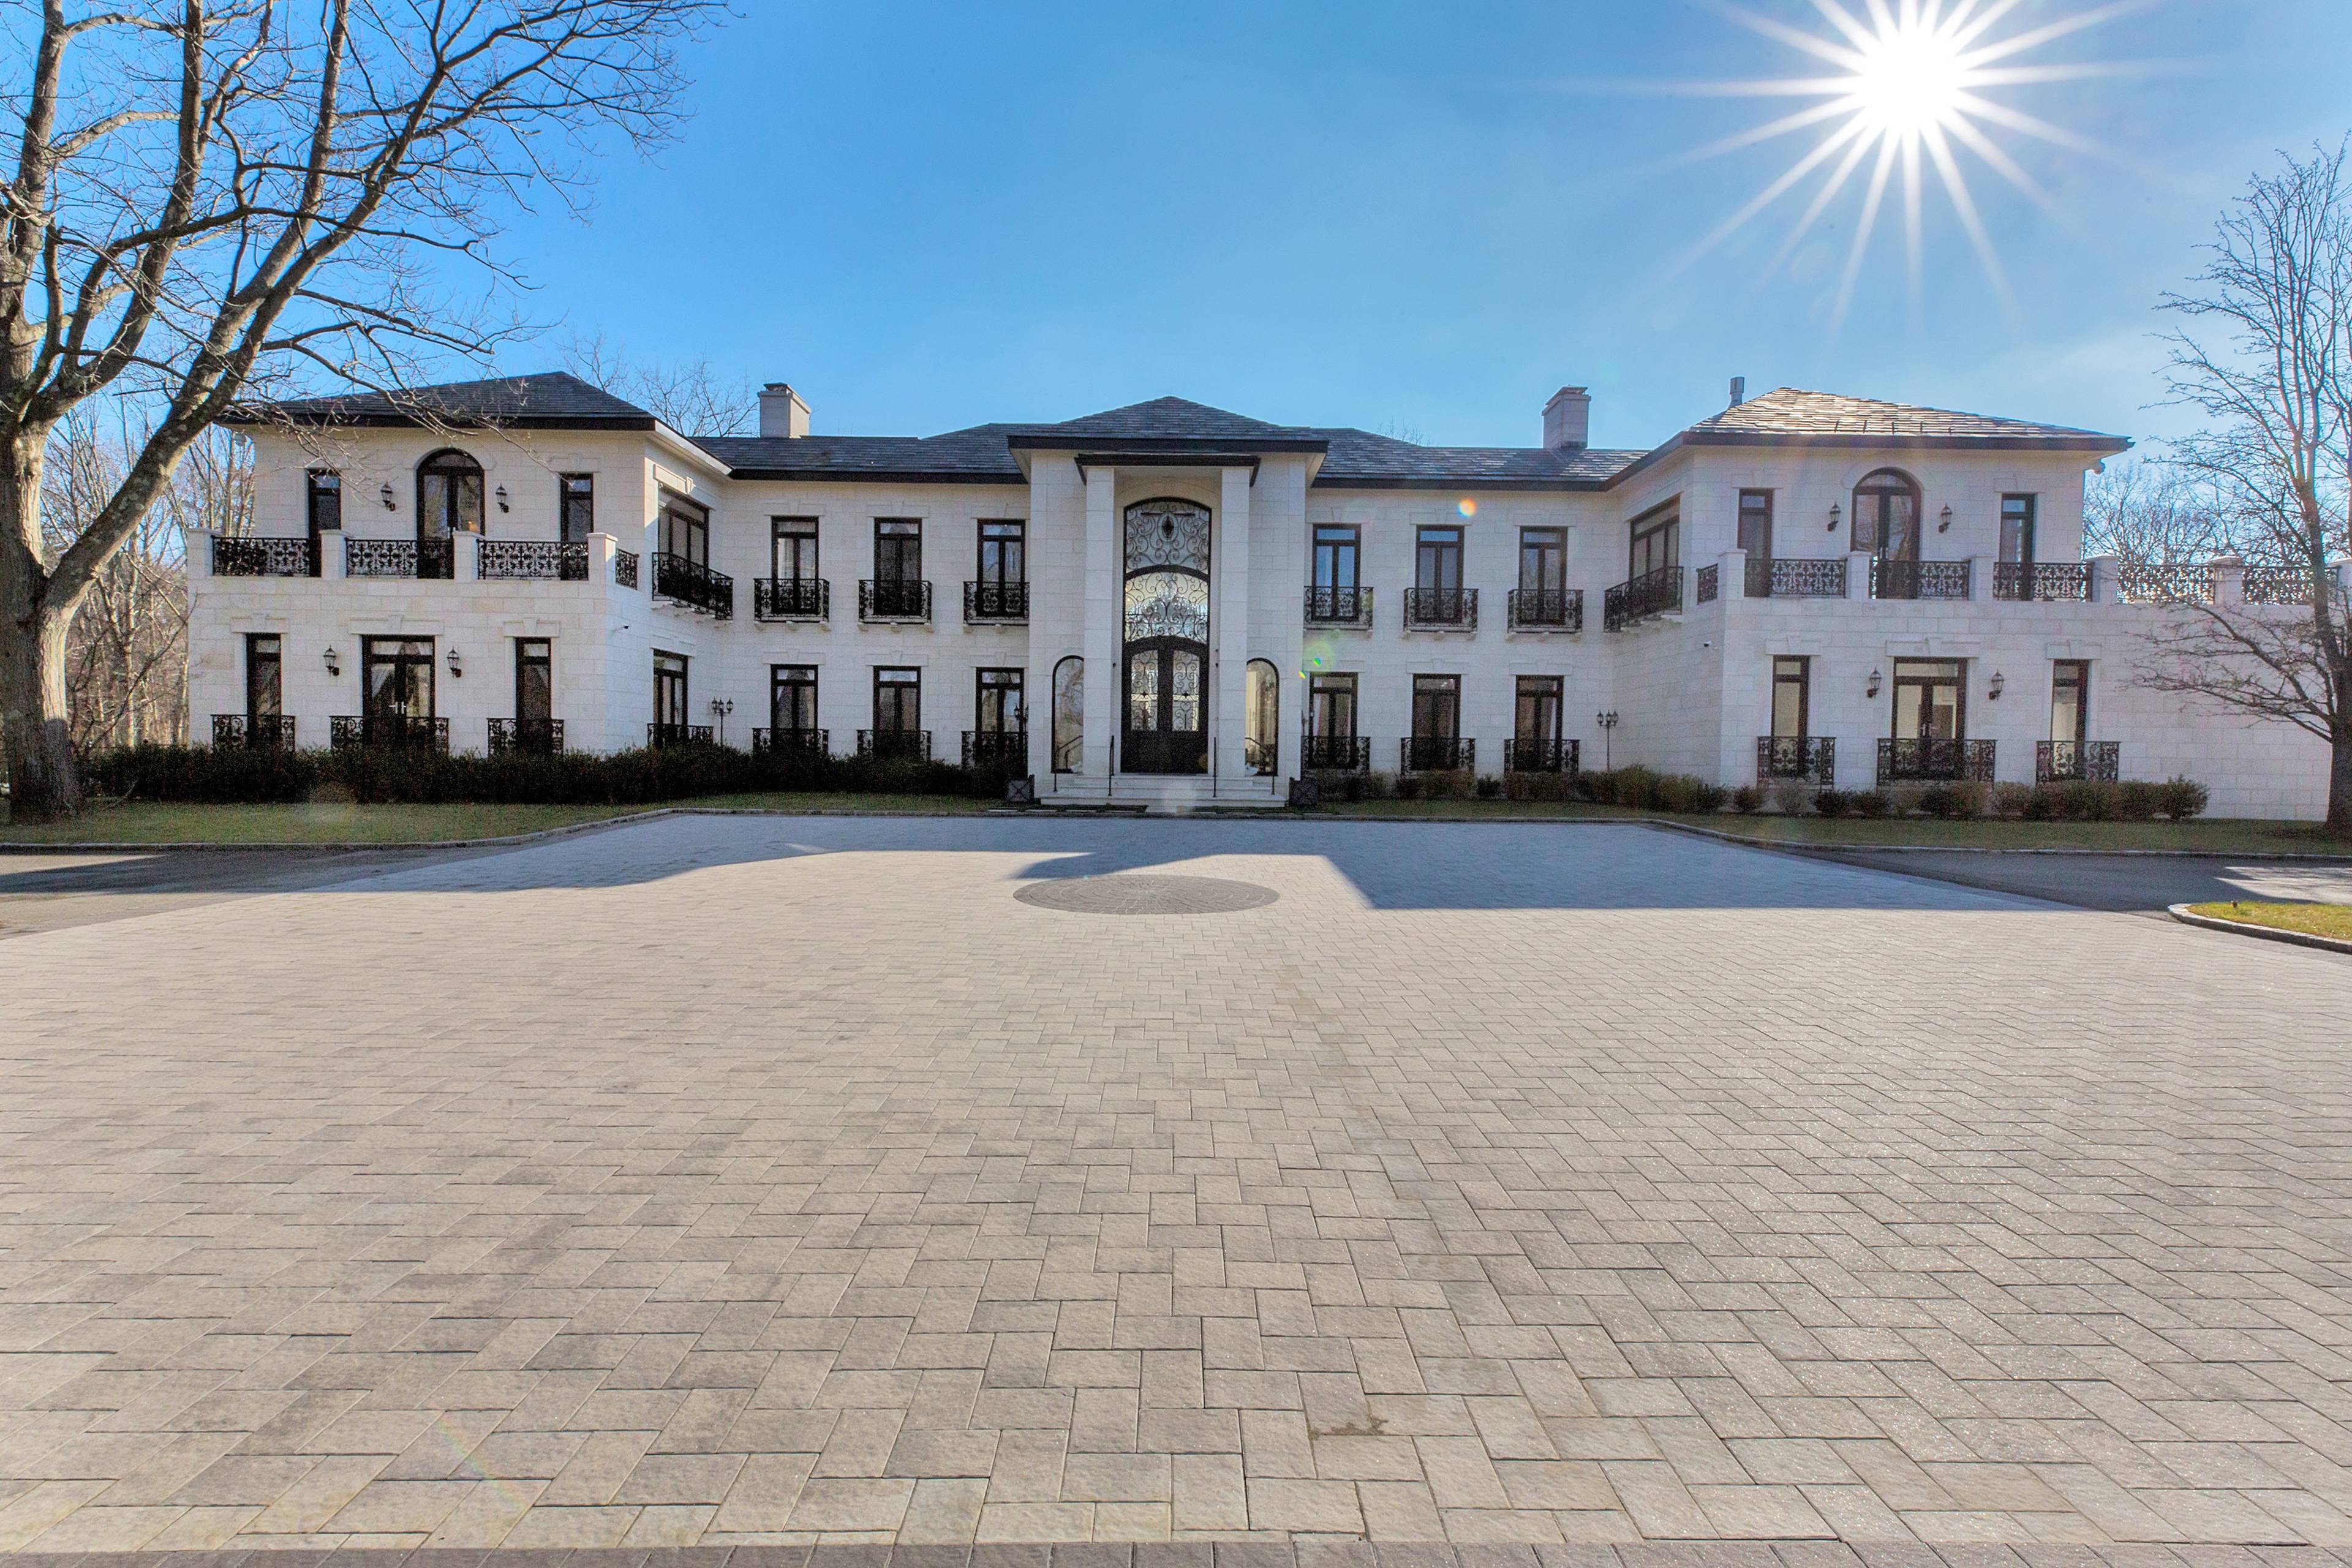 11,000 Sq. Ft. Modern Masterpiece in Matinecock